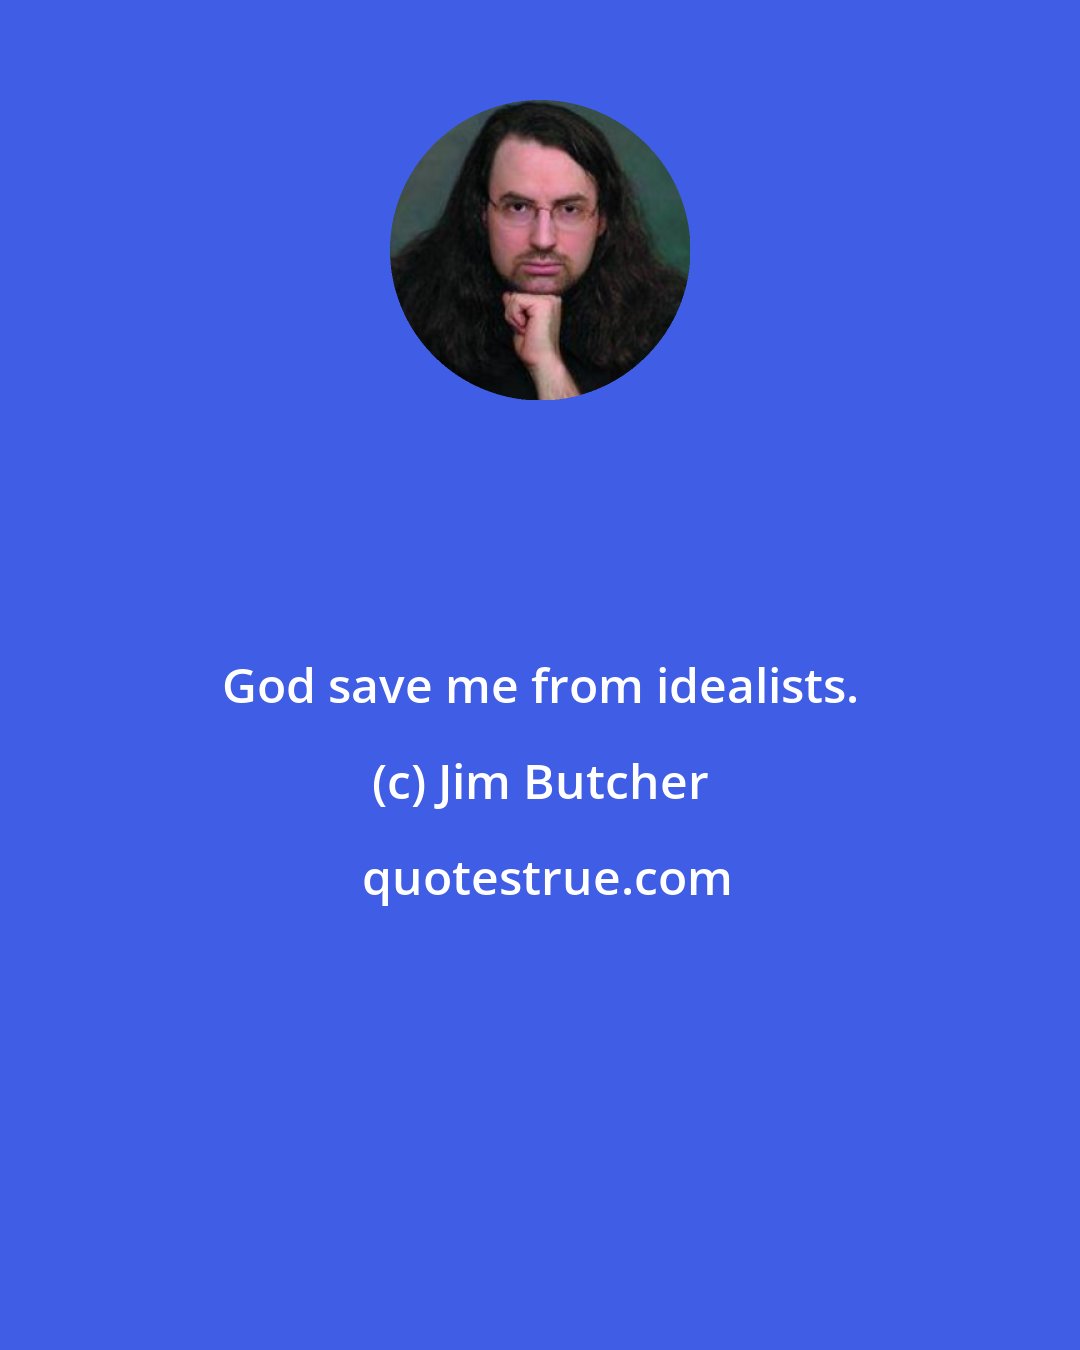 Jim Butcher: God save me from idealists.